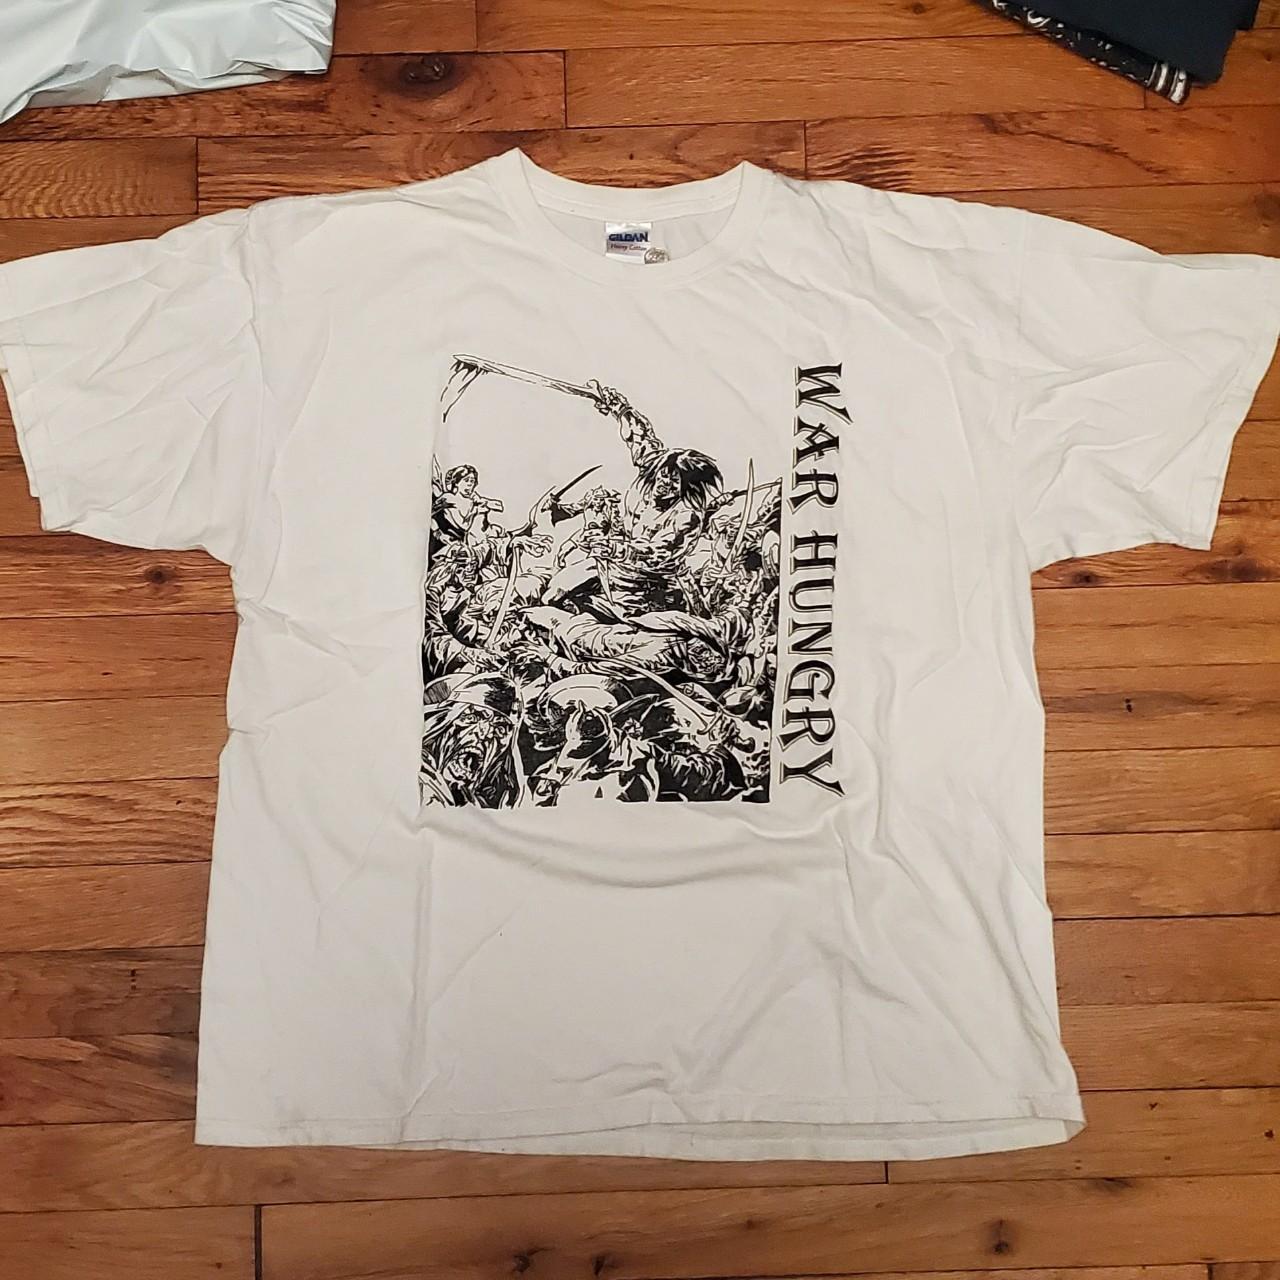 Product Image 1 - War Hungry - White Tshirt
Size